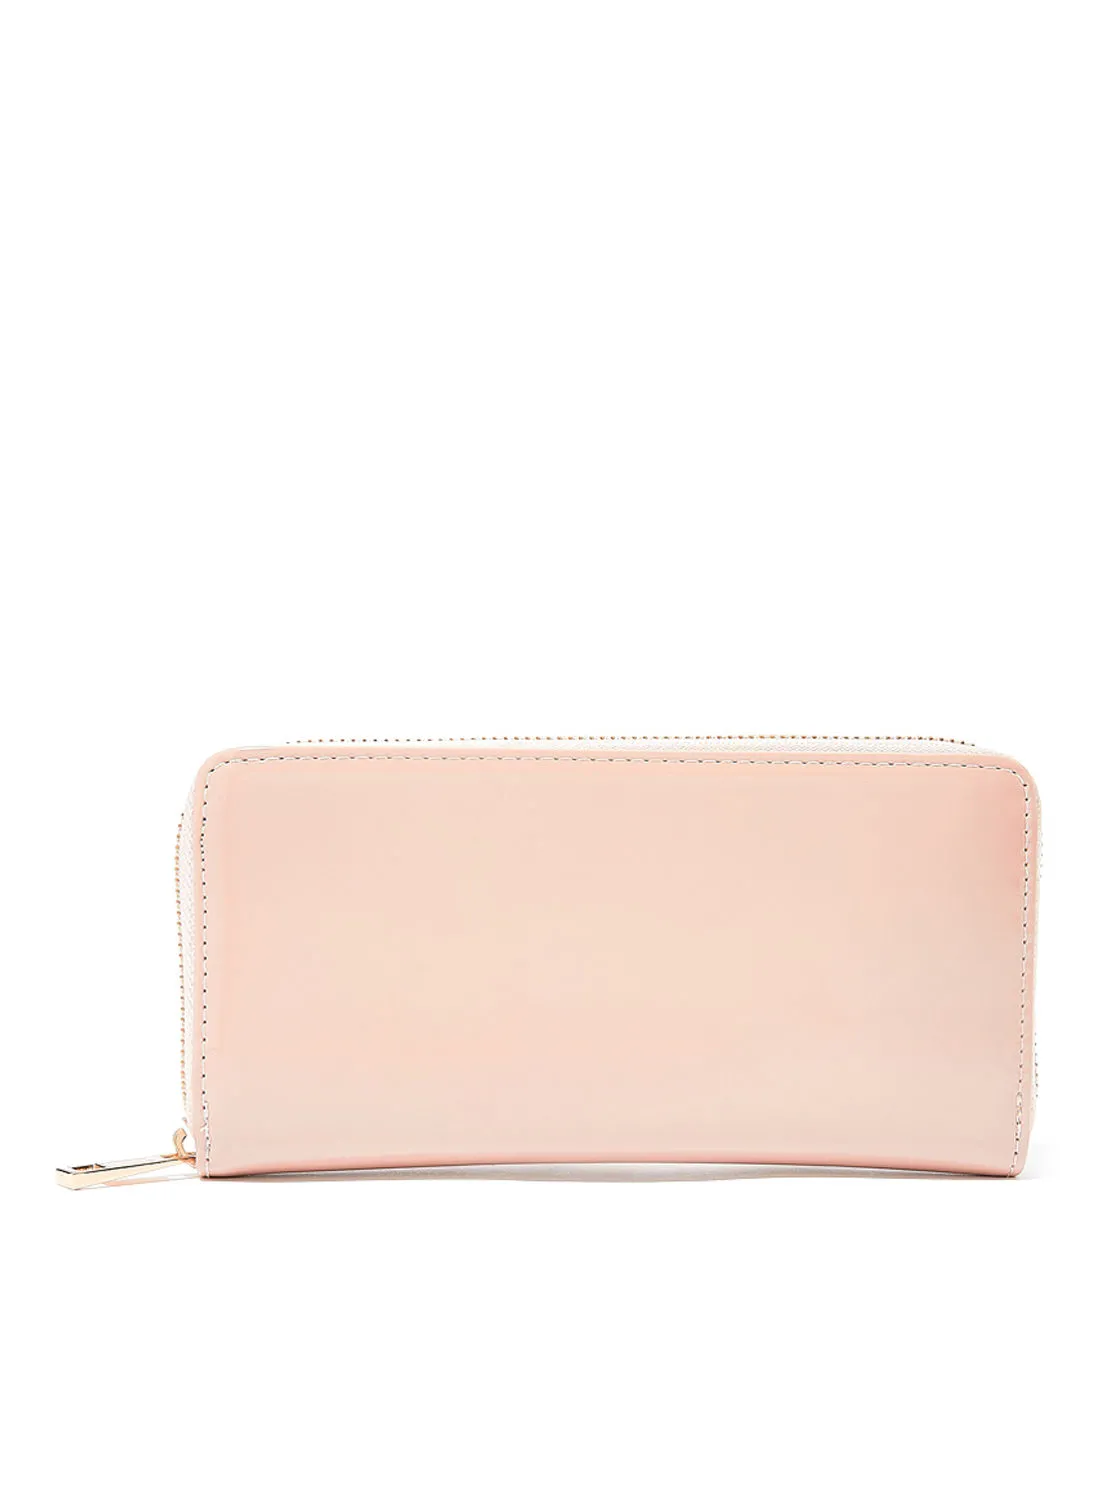 CARLO ROSSI Glossy Long Wallet Pink